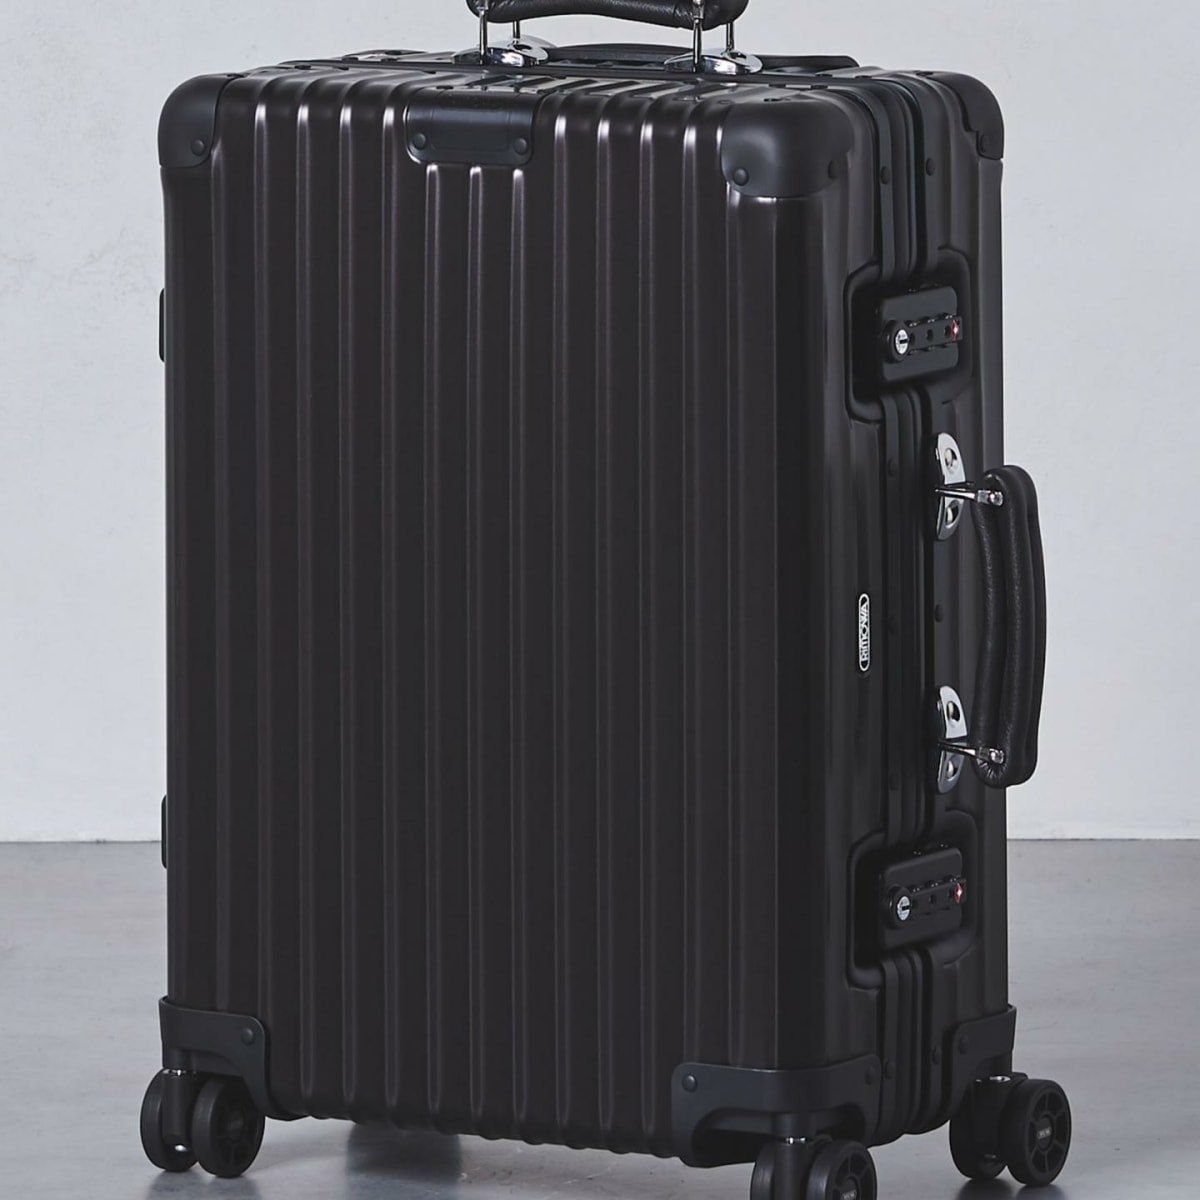 United Arrows is releasing Rimowa's Classic Flight suitcases in 